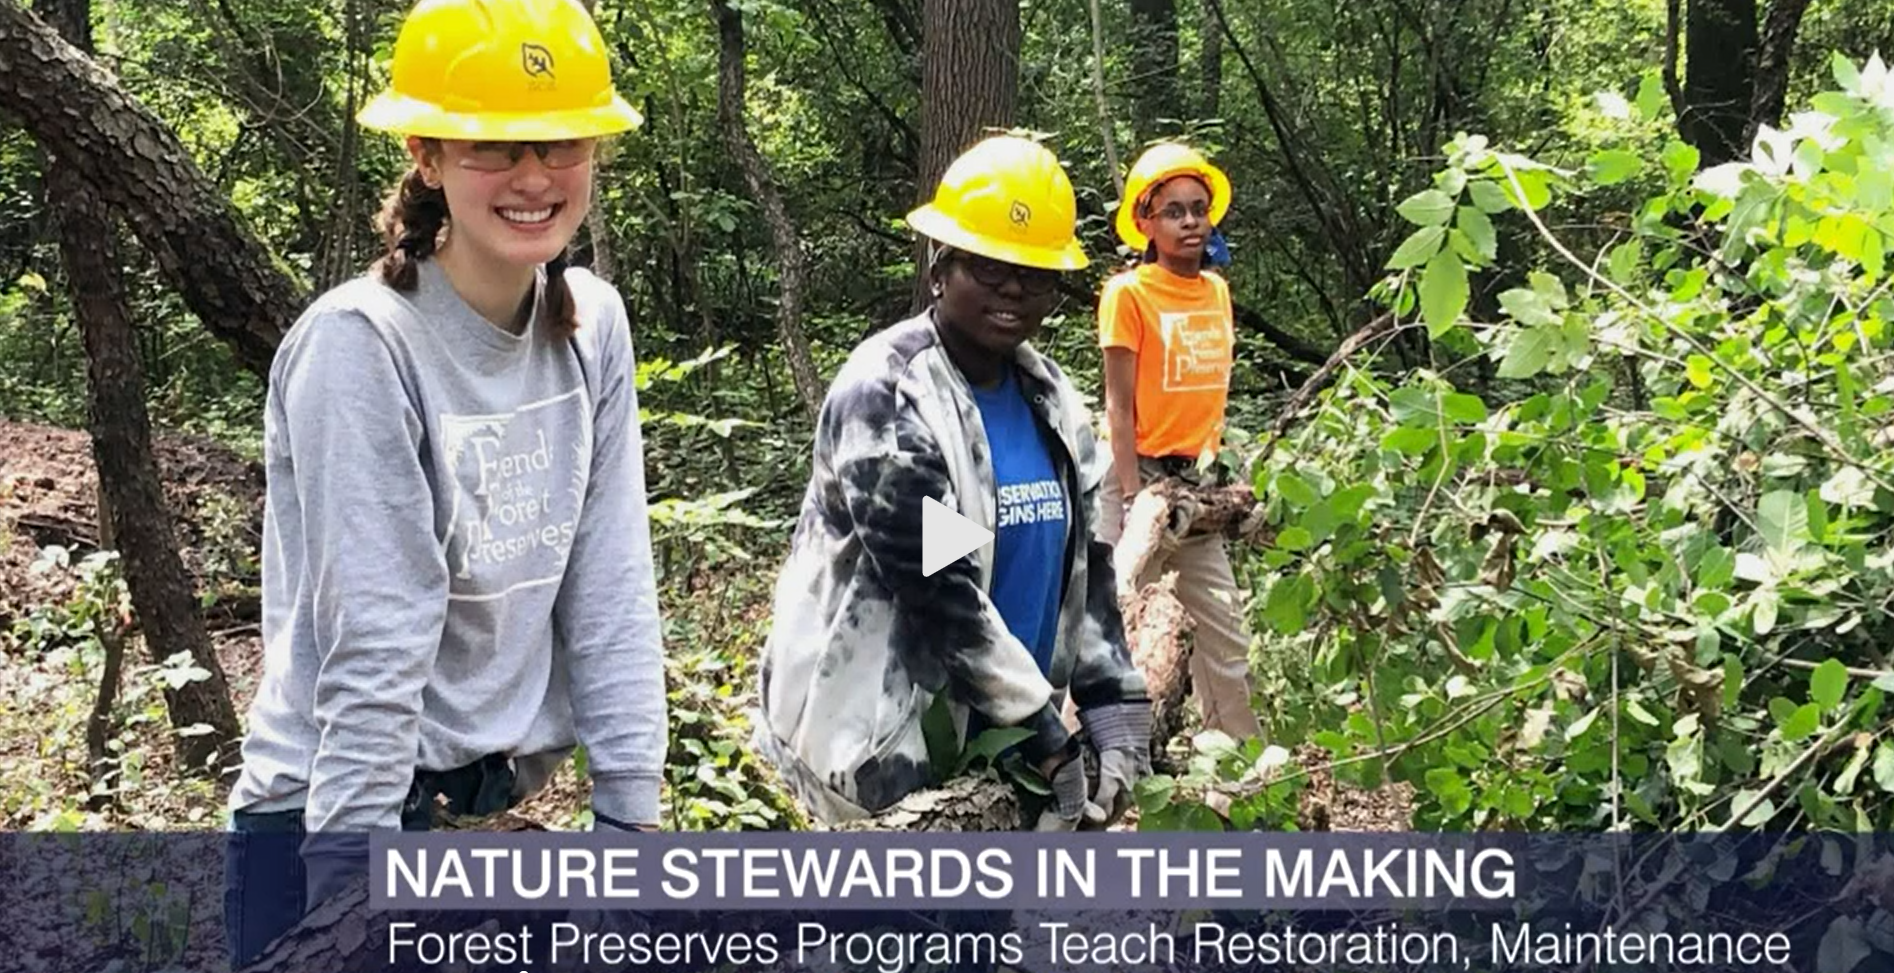 The Next Generation of Environmental Stewards Is Training at Cook County Forest Preserves